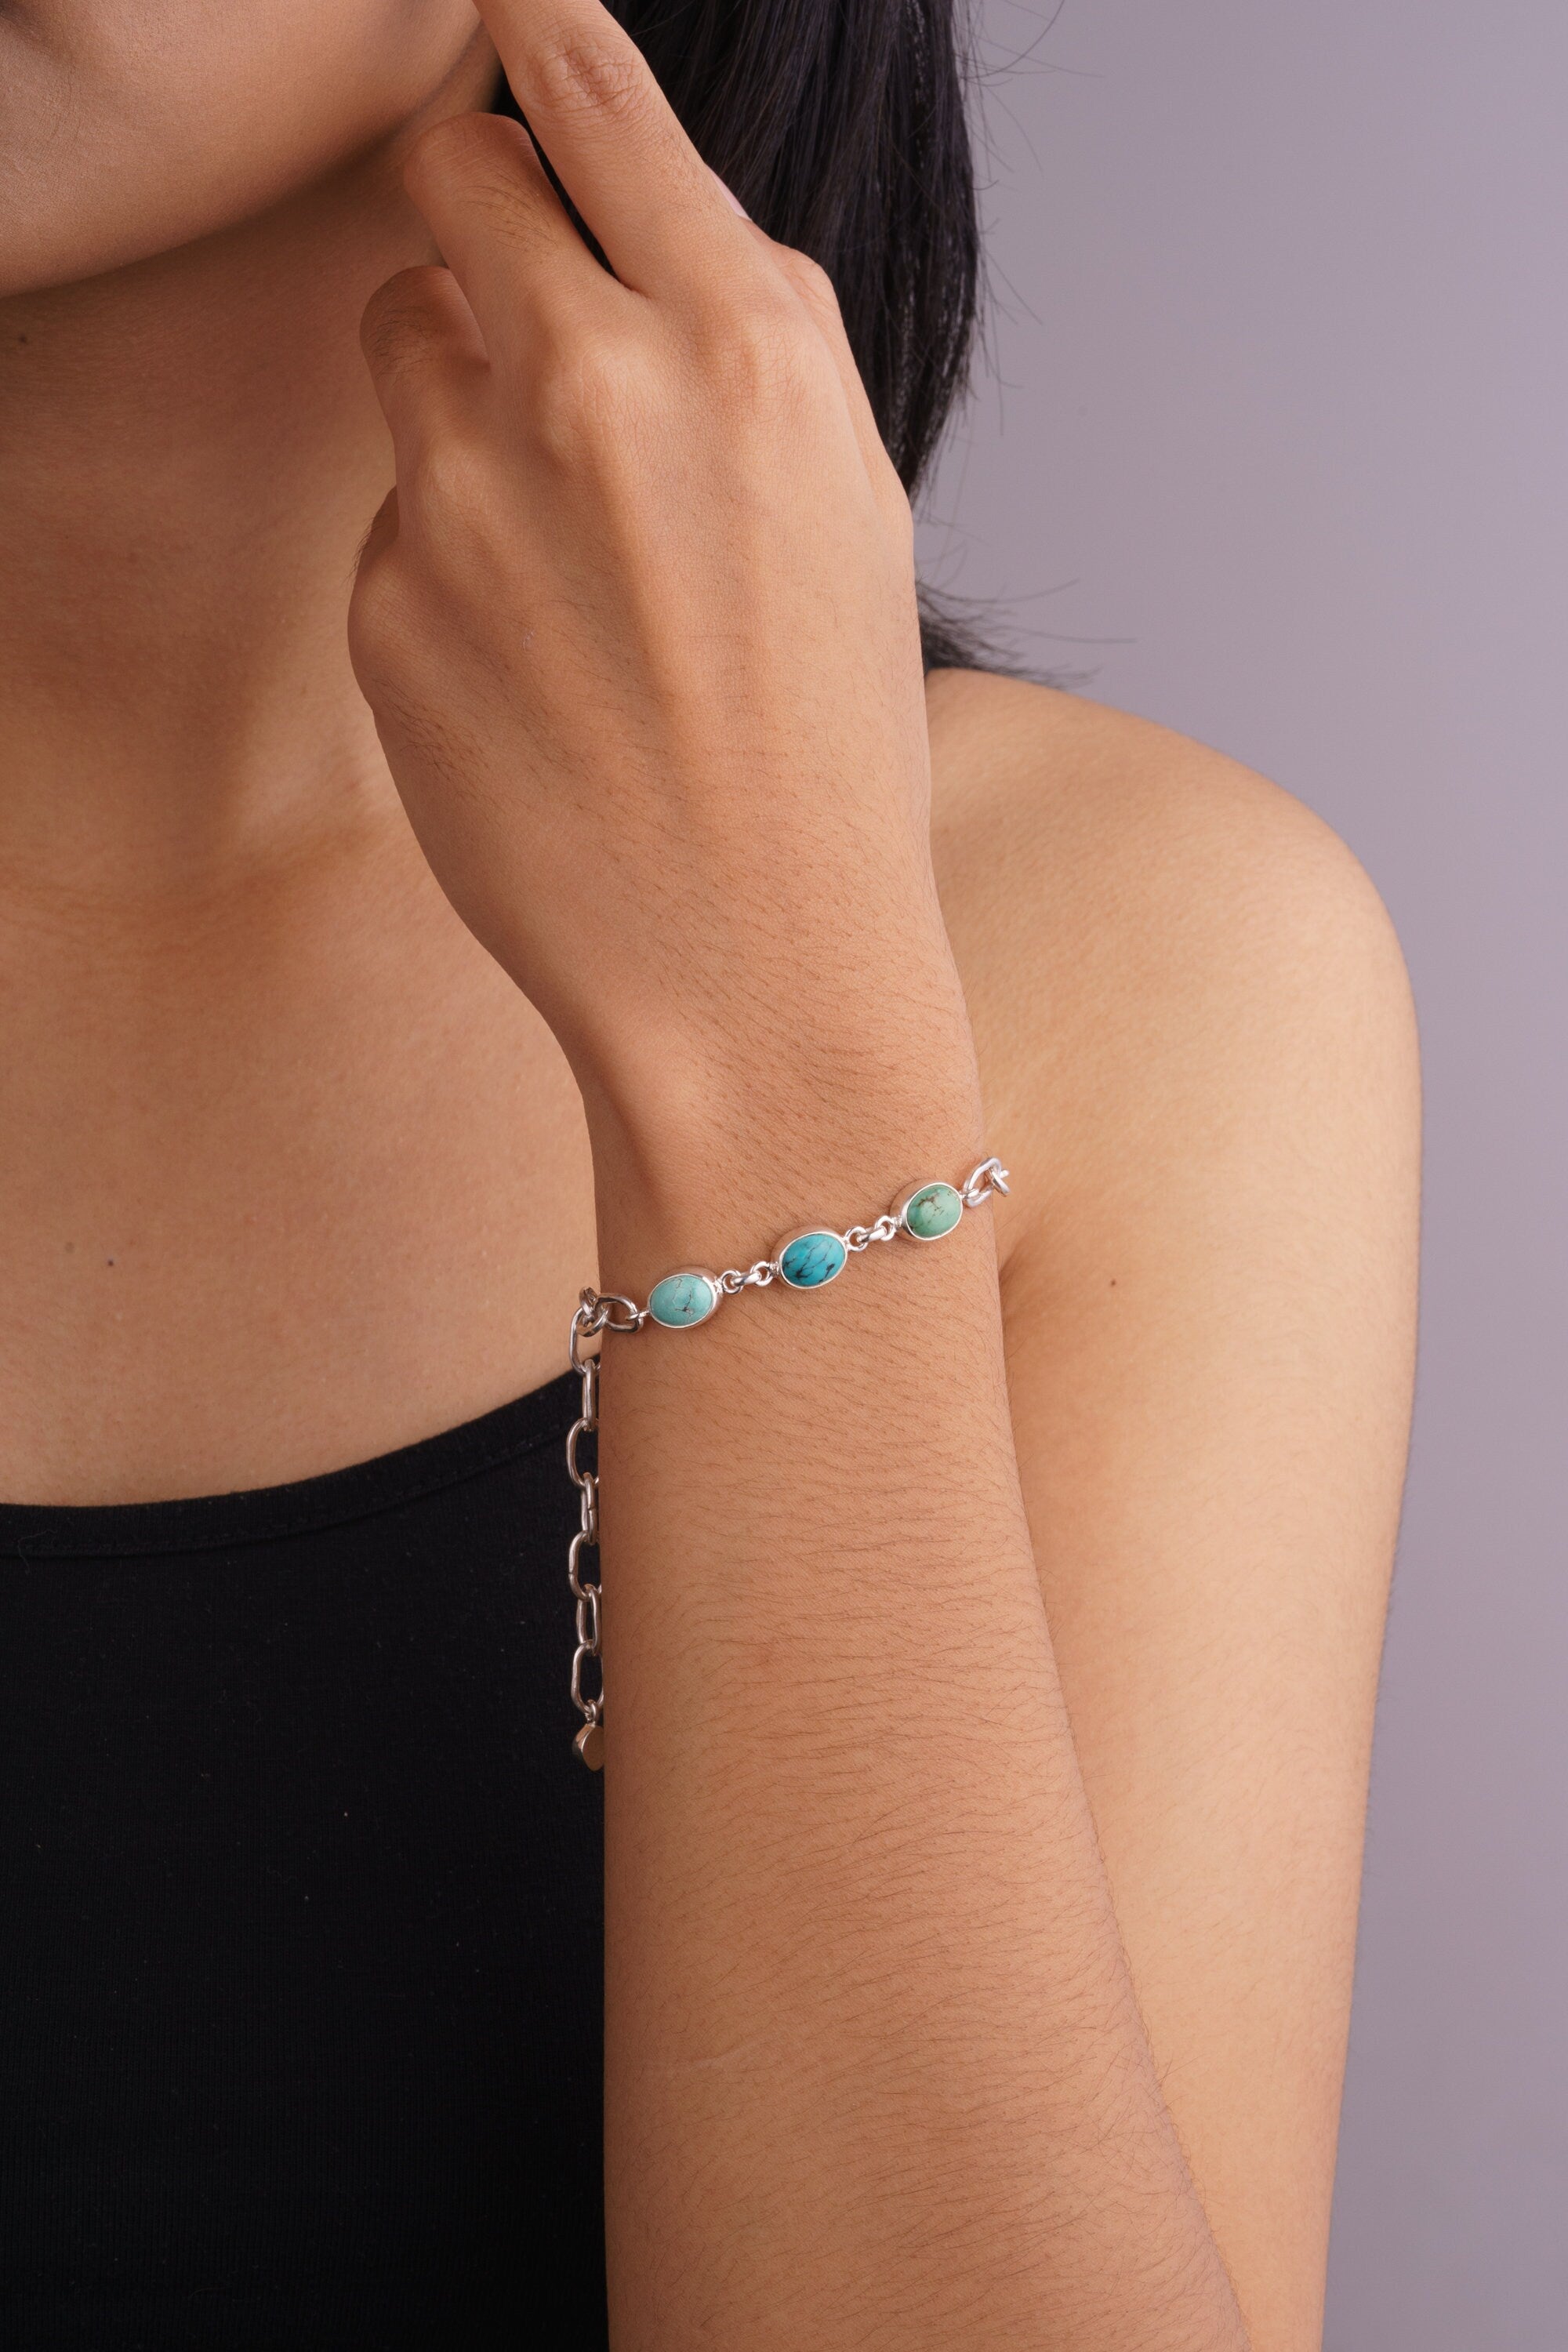 Adjustable Crystal Bracelet with Tibetan Turquoise & Herkimer Diamond Charm 925 Sterling Silver Hammered Thick Link Chain Polished Finish